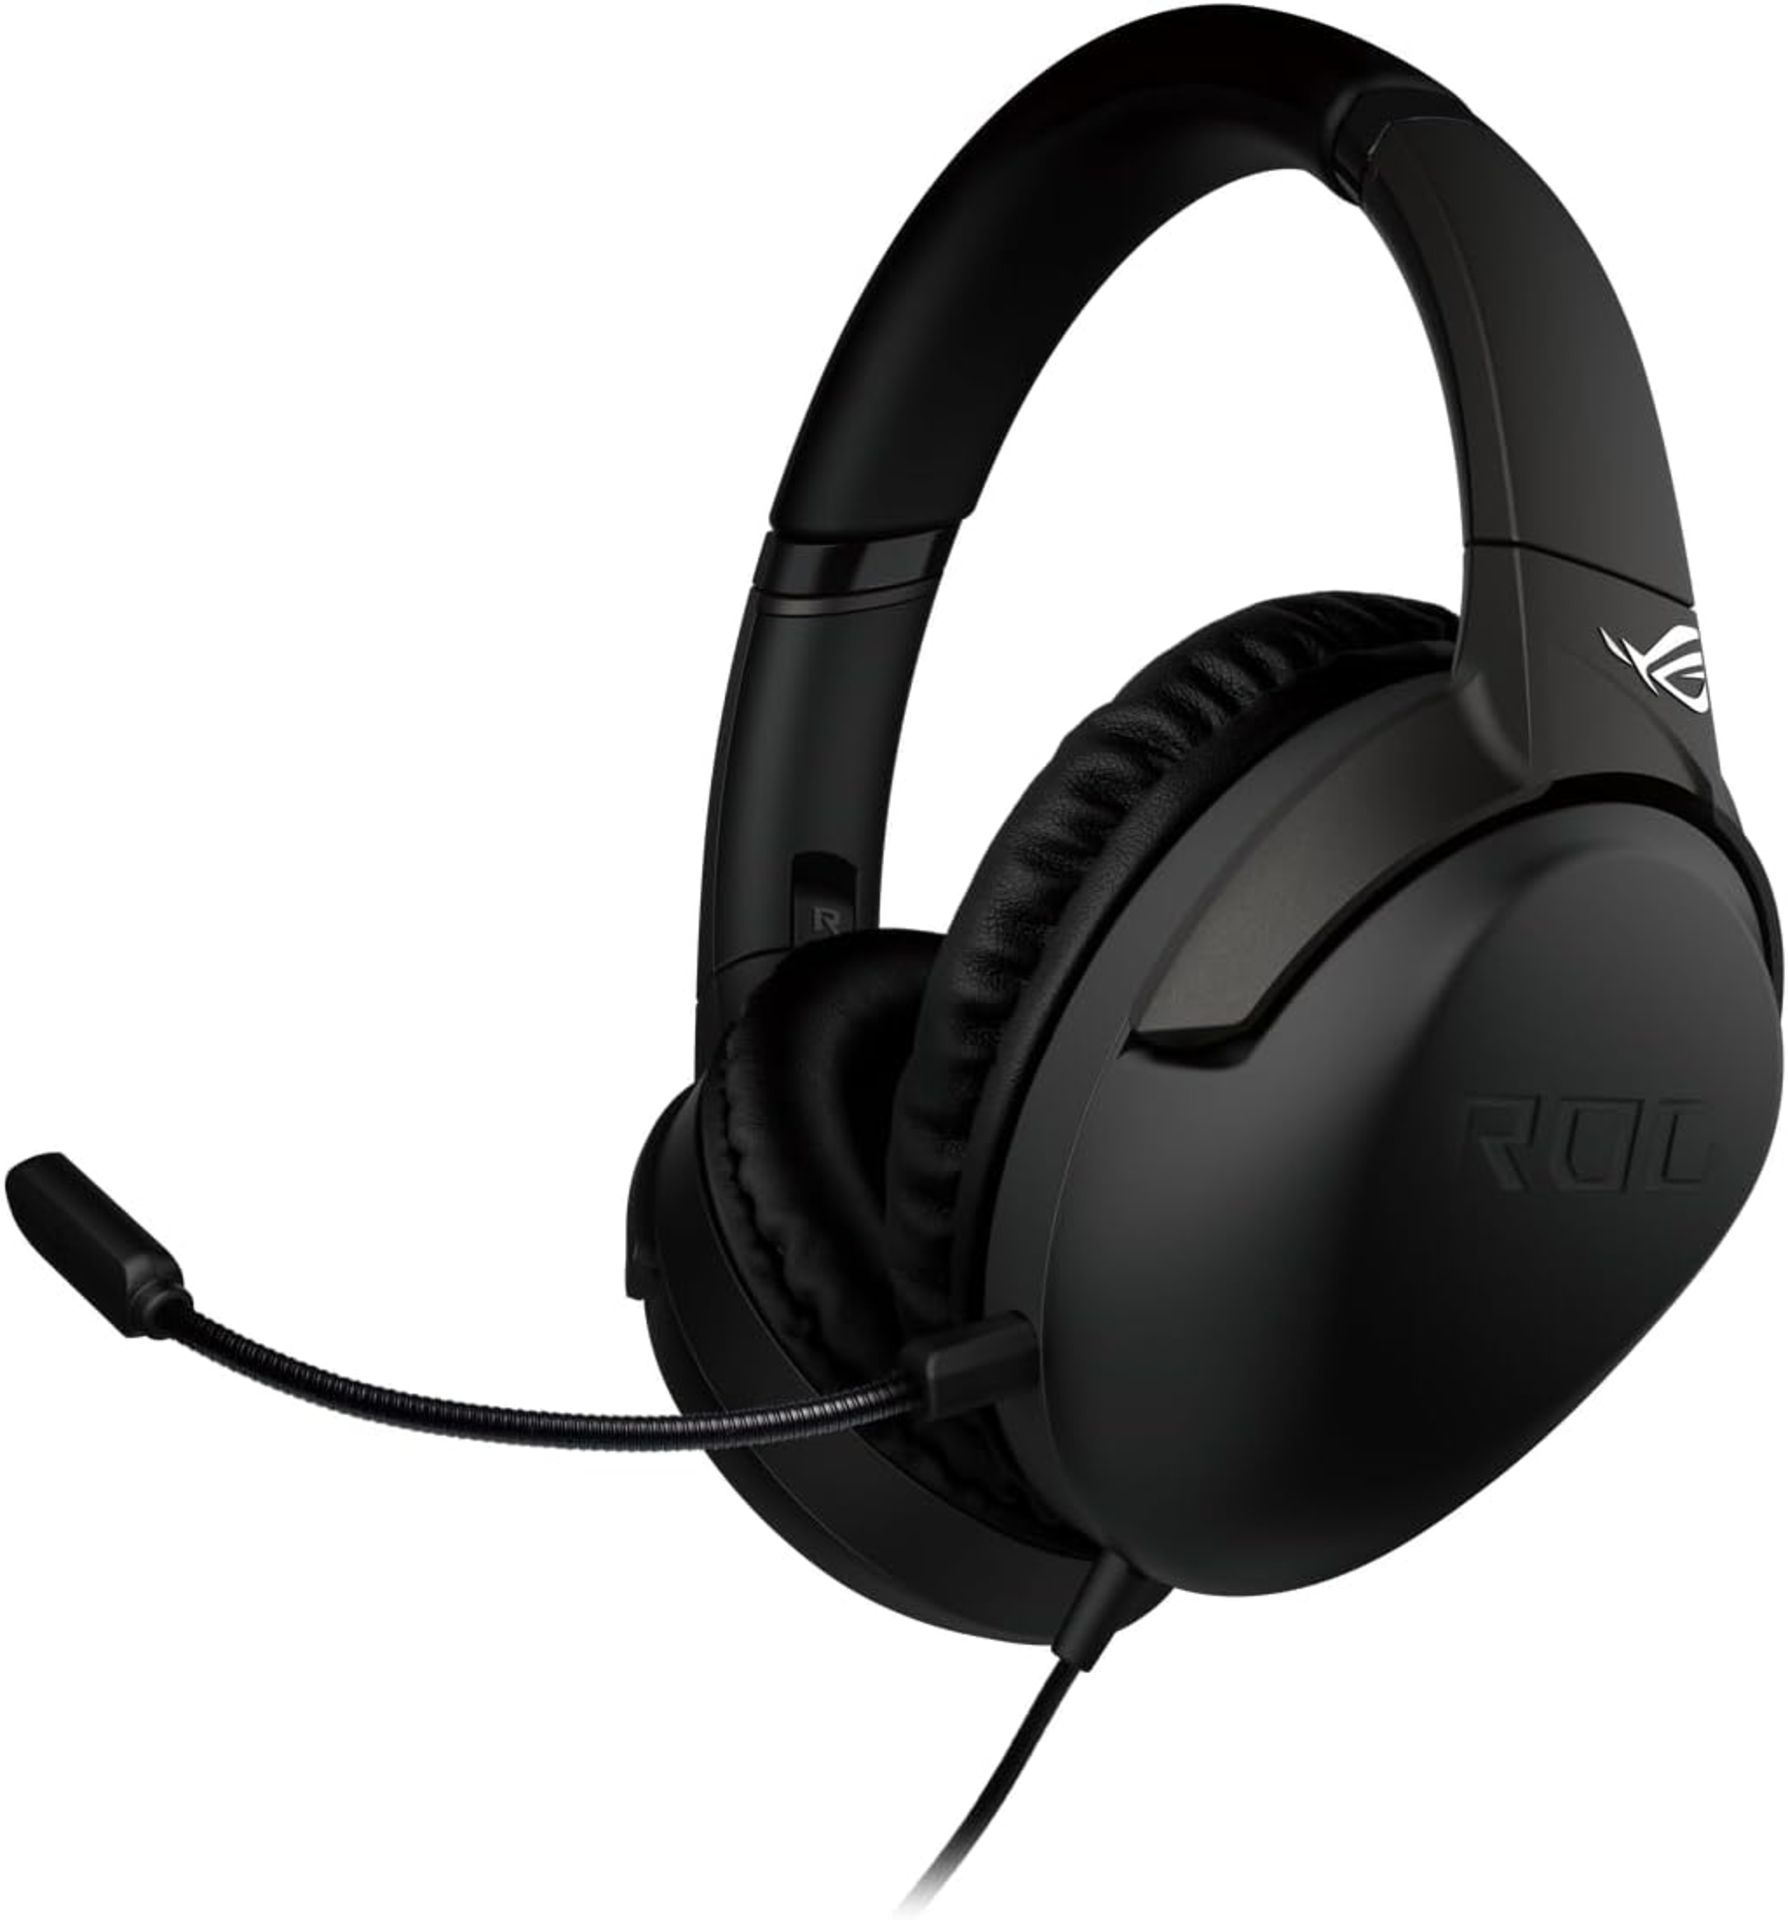 BRAND NEW FACTORY SEALED ASUS ROG Strix Go Core Gaming Headset. RRP £79.99. Exclusive airtight